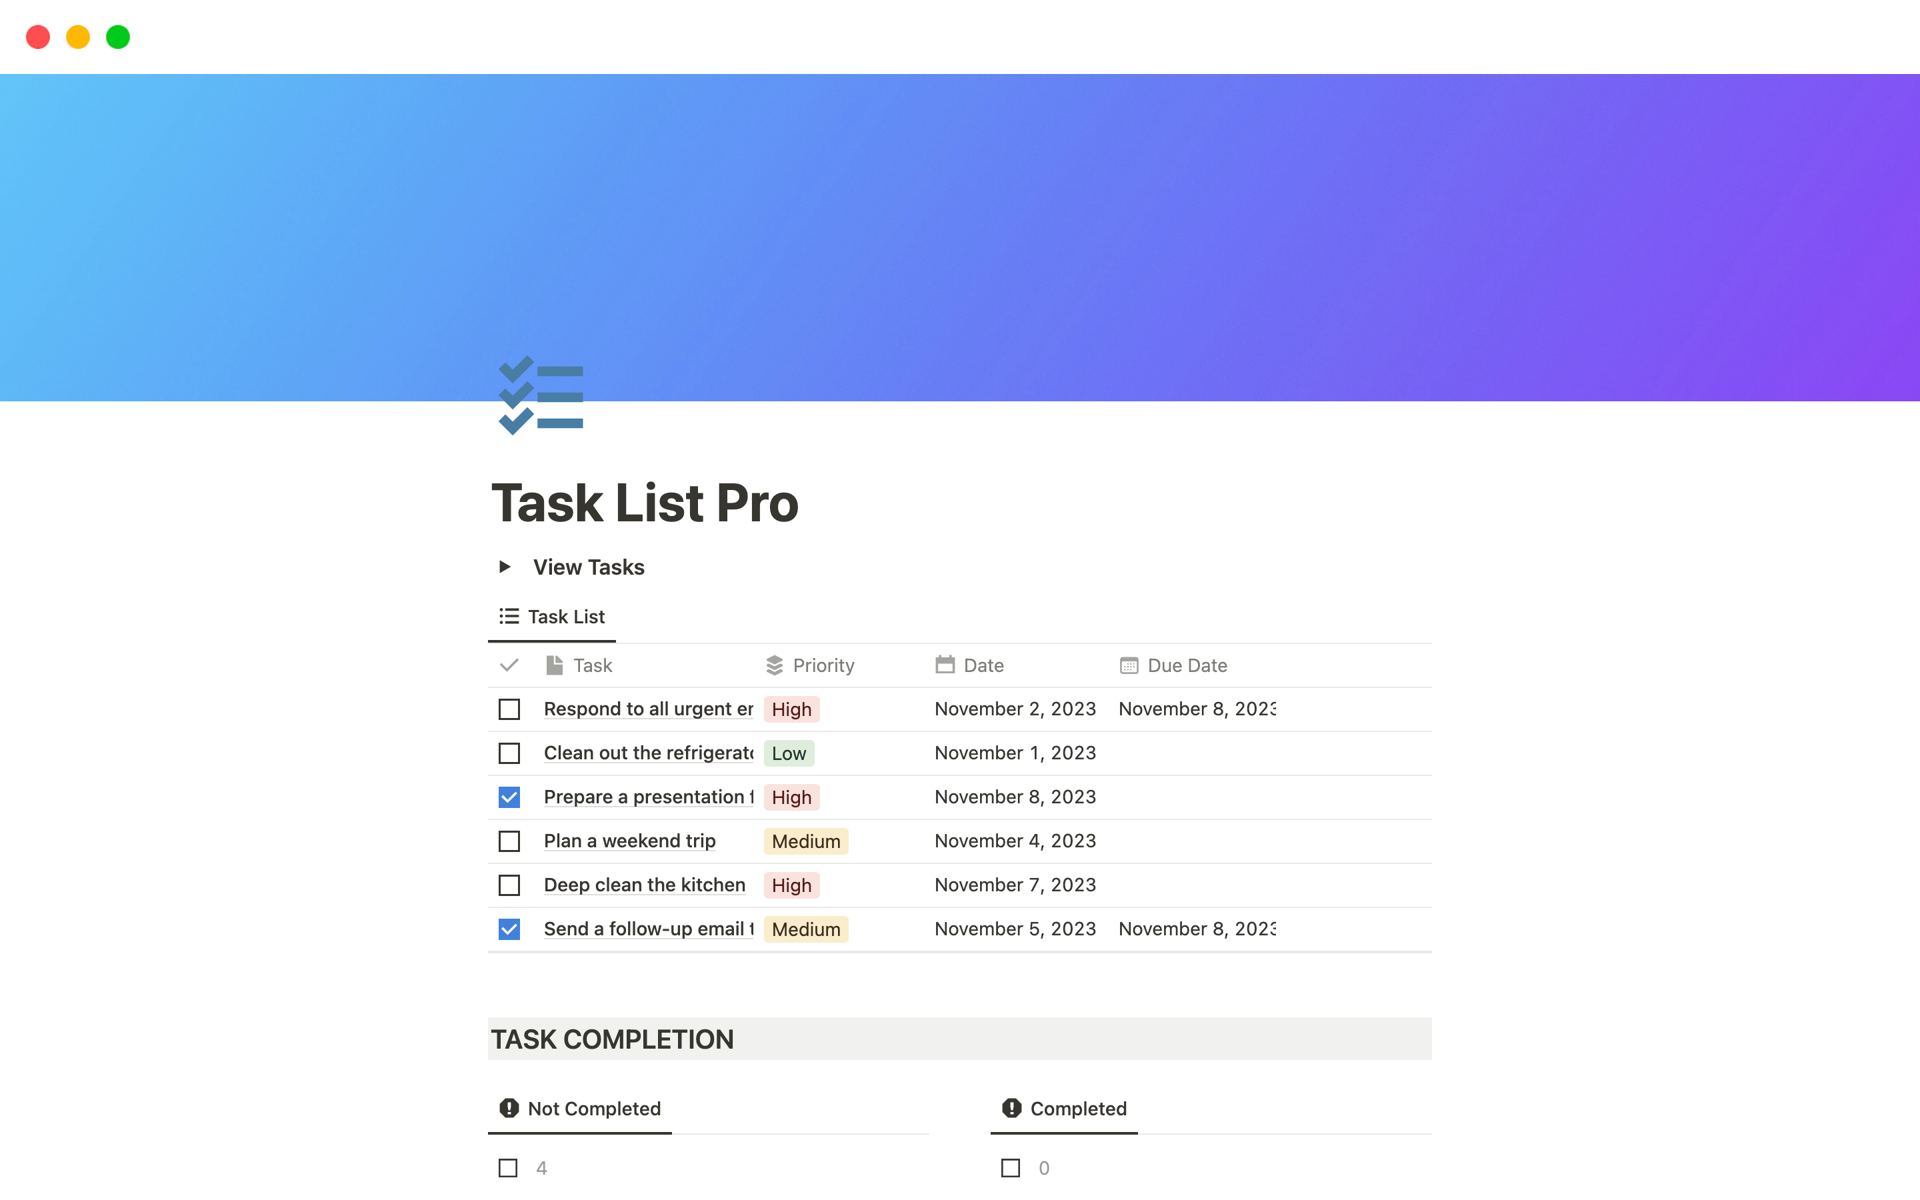 Task List Pro is a template that helps you easily see all of your tasks in one place so you can prioritize and manage tasks effectively.